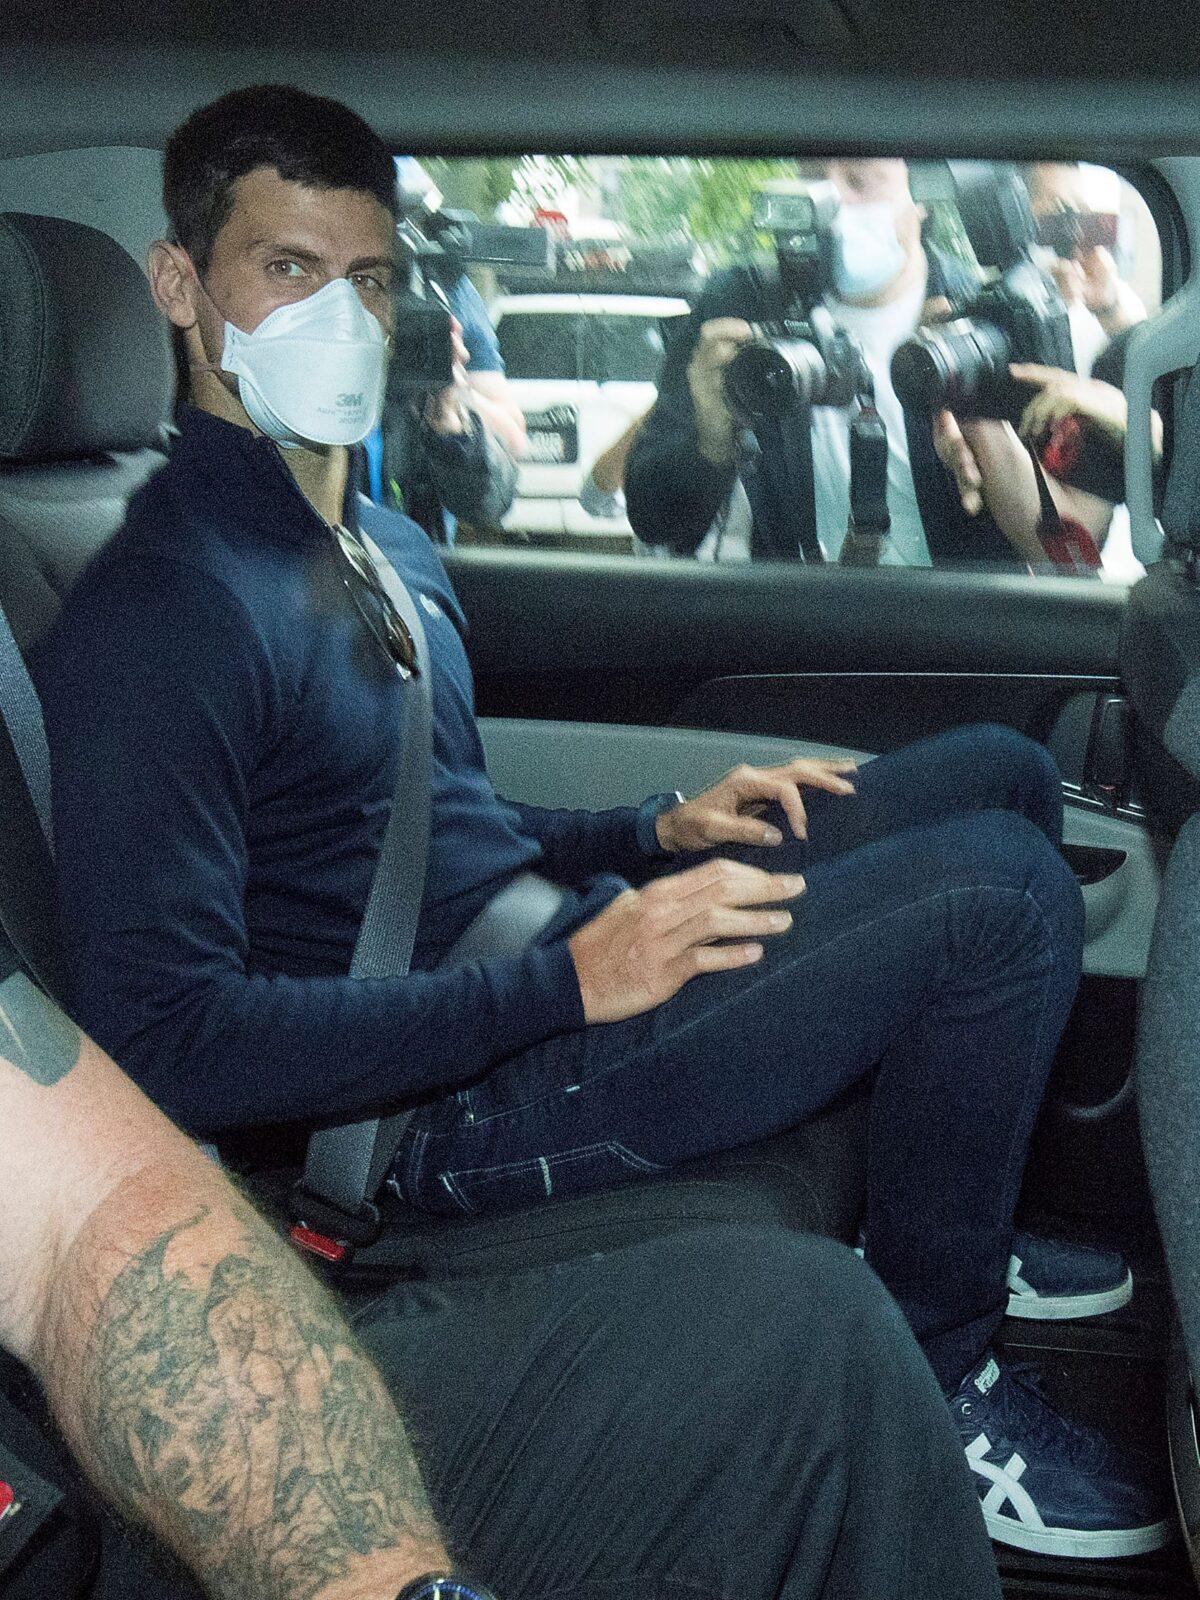 Serbian tennis player Novak Djokovic rides in car as he leaves a government detention facility before attending a court hearing at his lawyers office in Melbourne, Australia, on Jan. 16, 2022. (James Ross/AAP via AP)